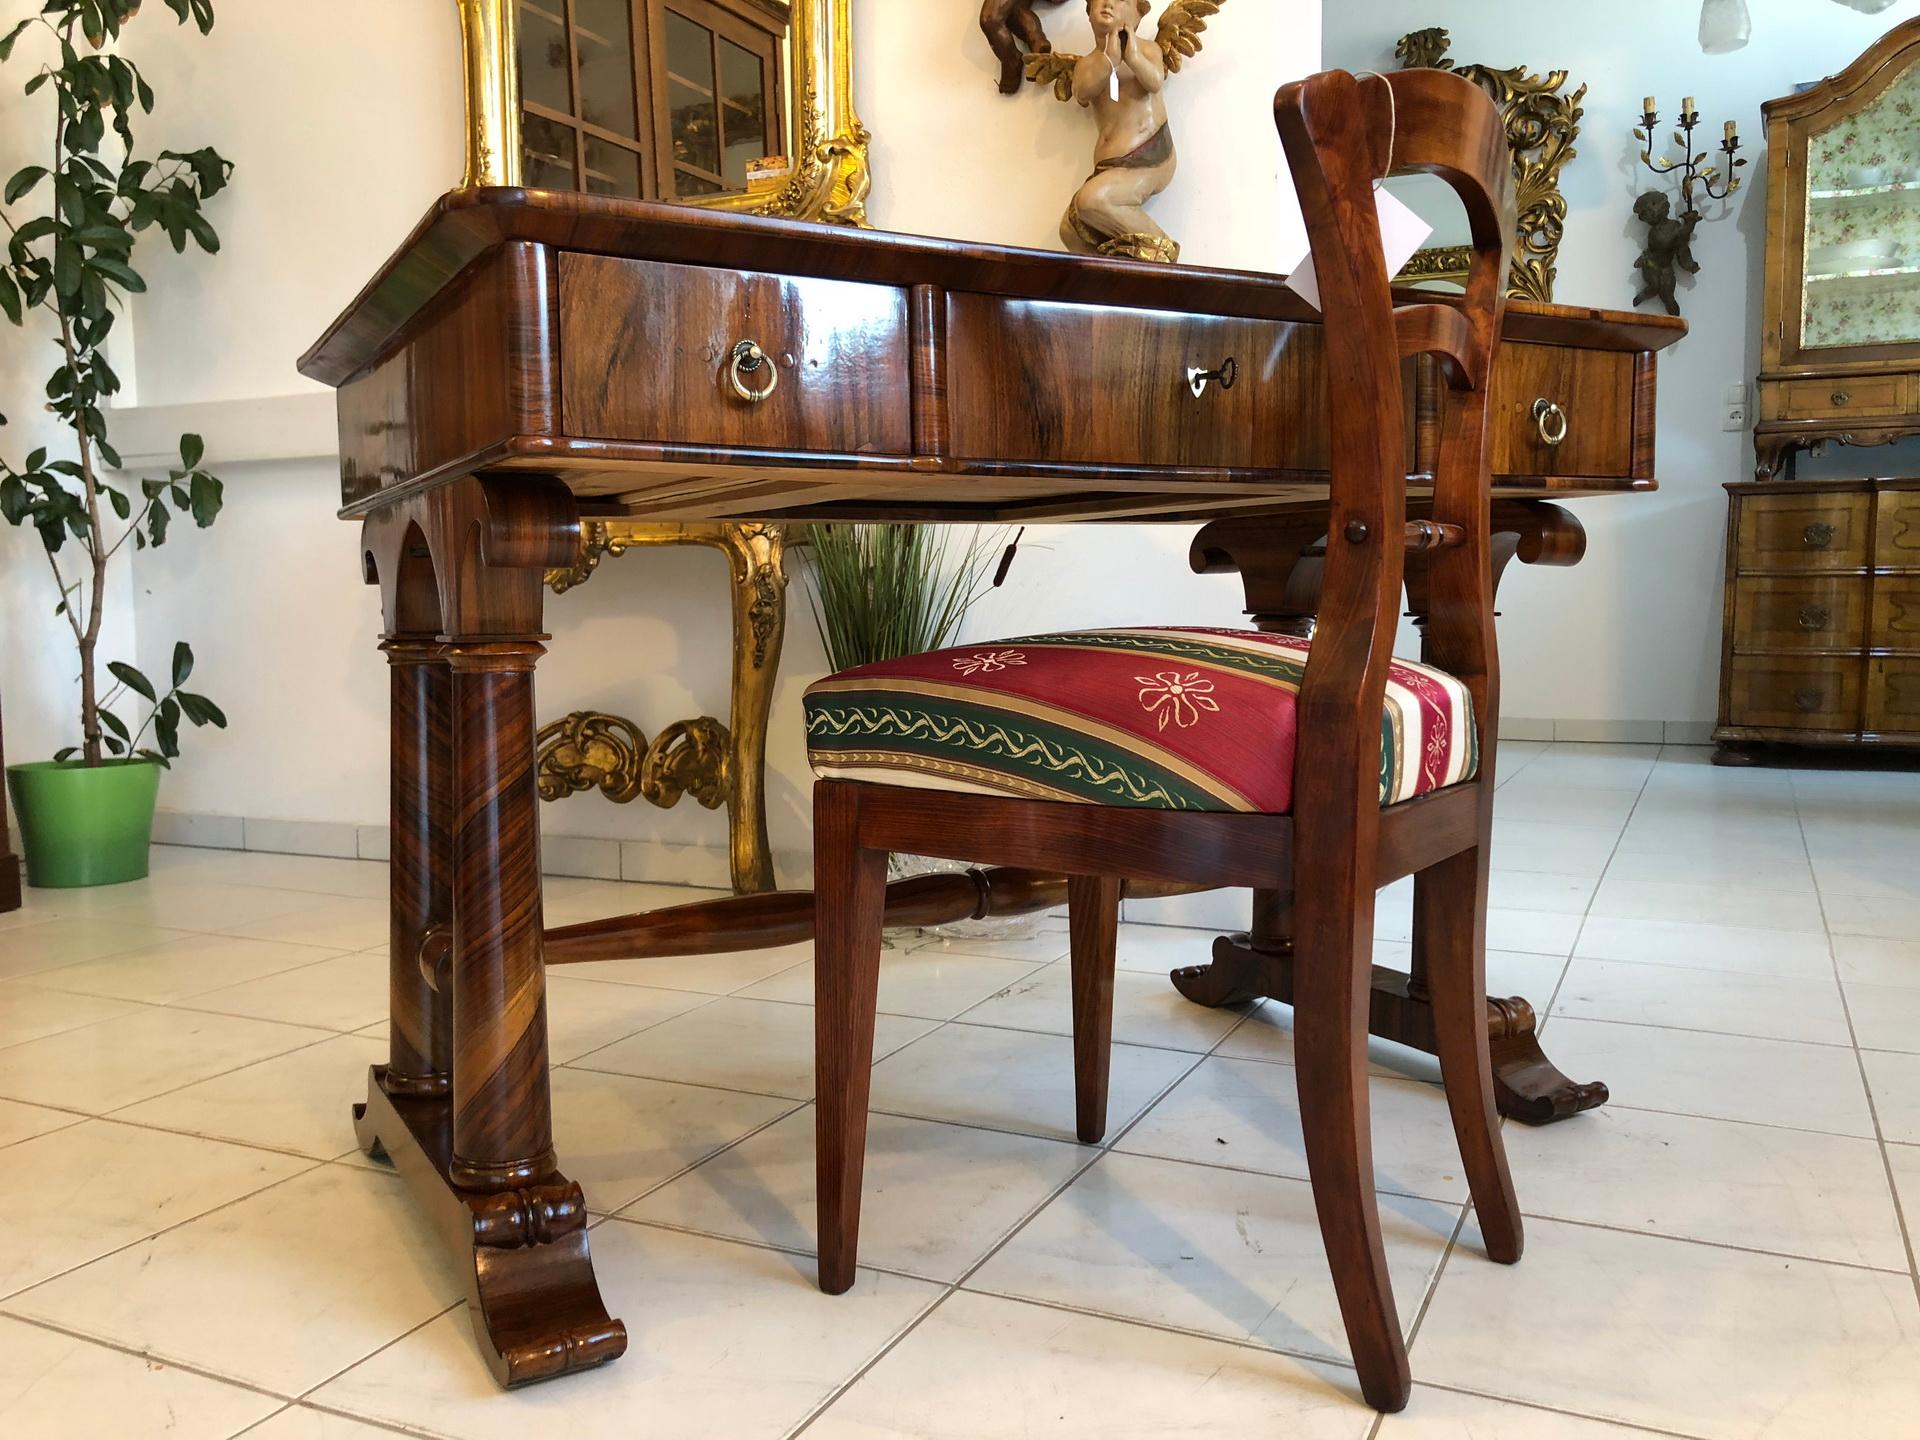 Original desk from the time of the Biedermeier circa 1845 designed by Josef Danhauser, Vienna.
A beautiful restored desk with stunning column feet and a rootwood or burl writing surface with an inlayed new red leather panel.
This desk is an